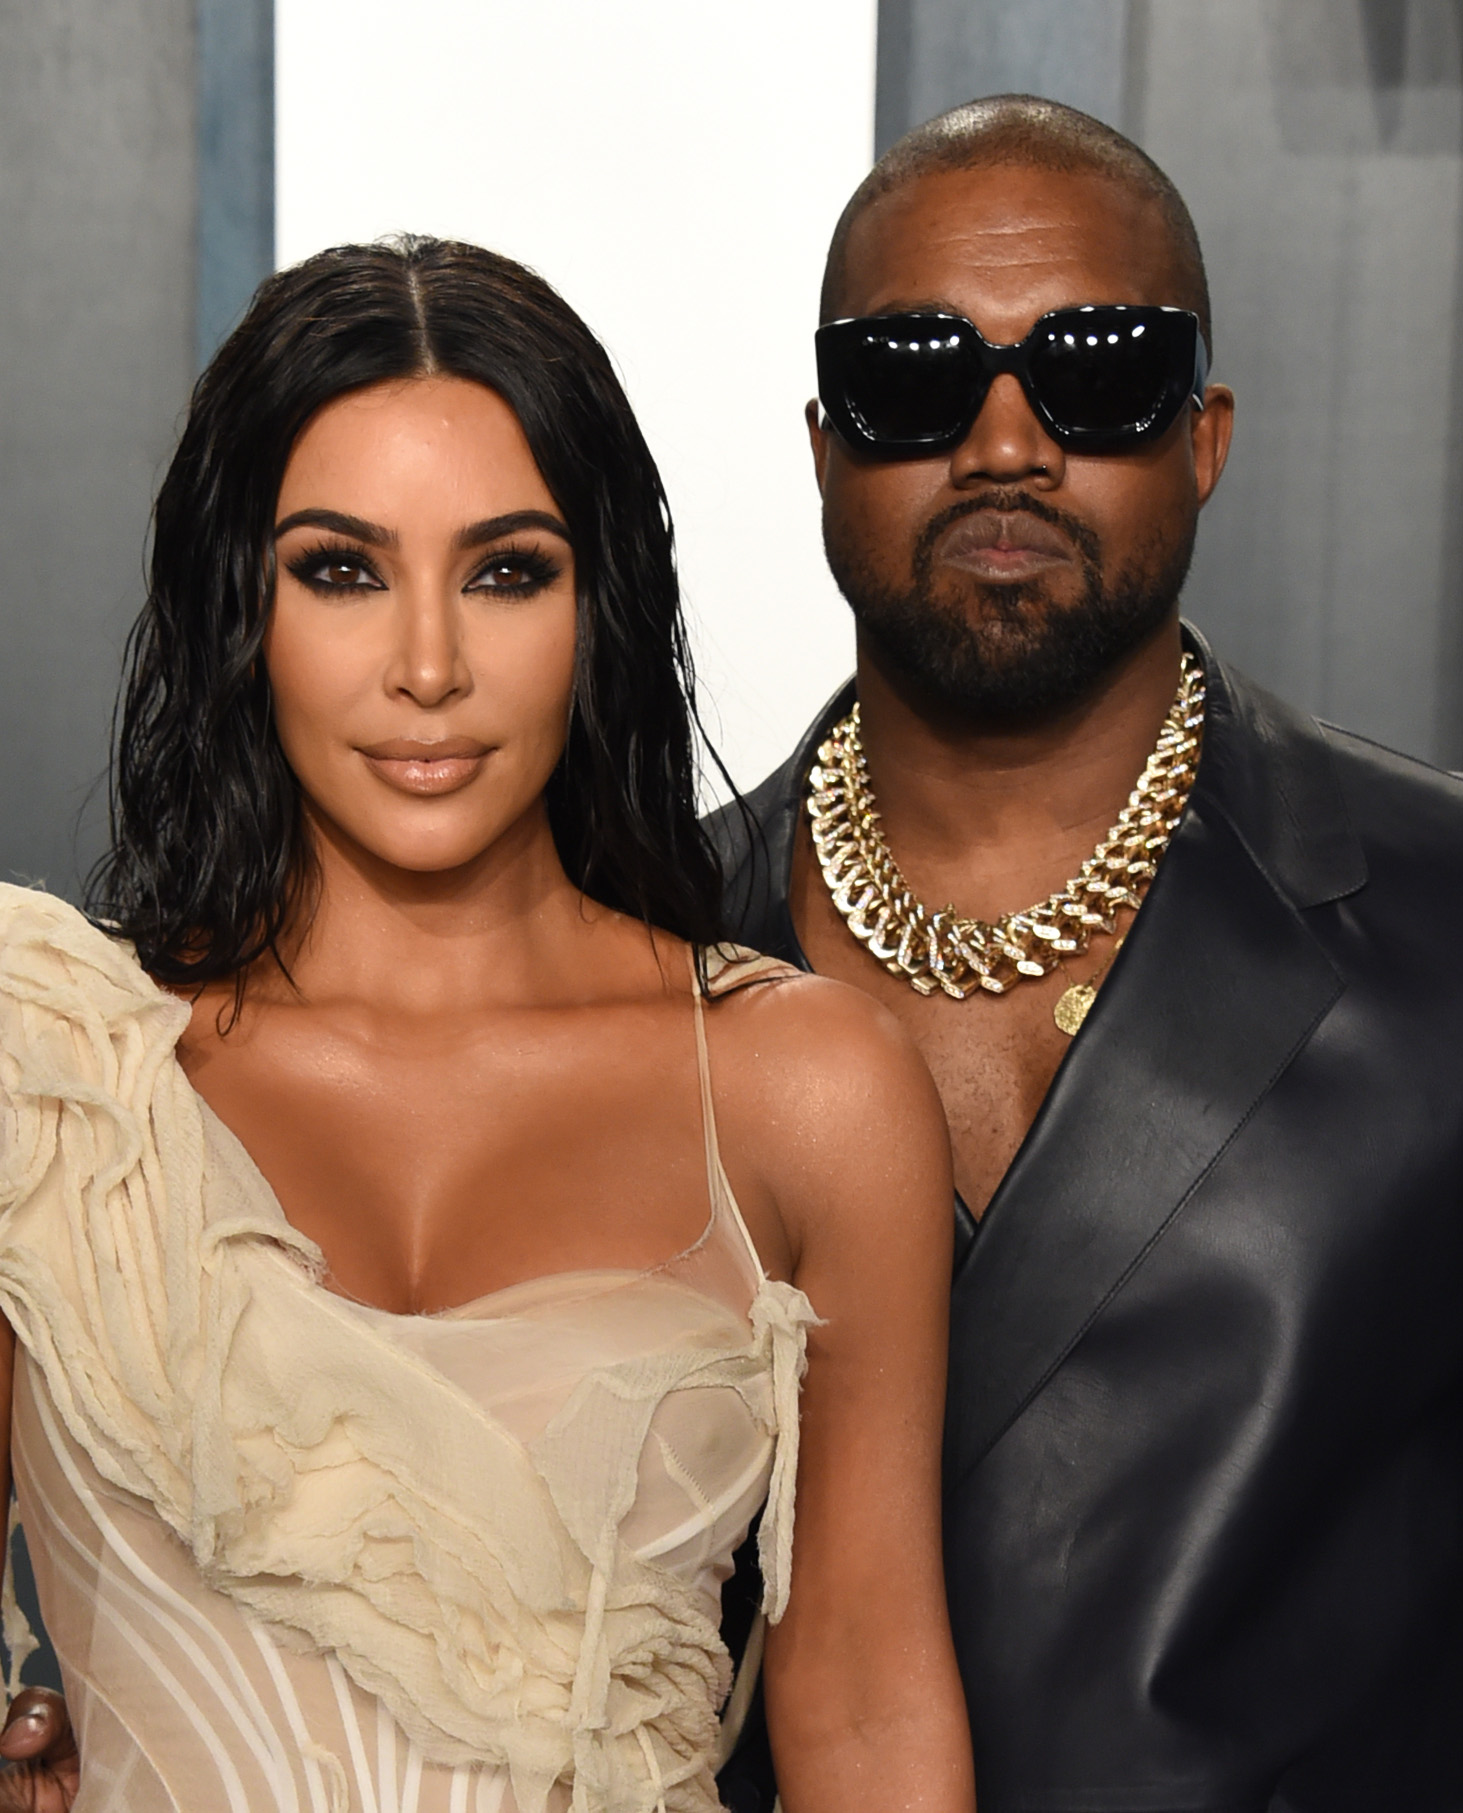 Kim Kardashian and Kanye West at the 2020 Vanity Fair Oscar Party in Beverly Hills | Source: Getty Images